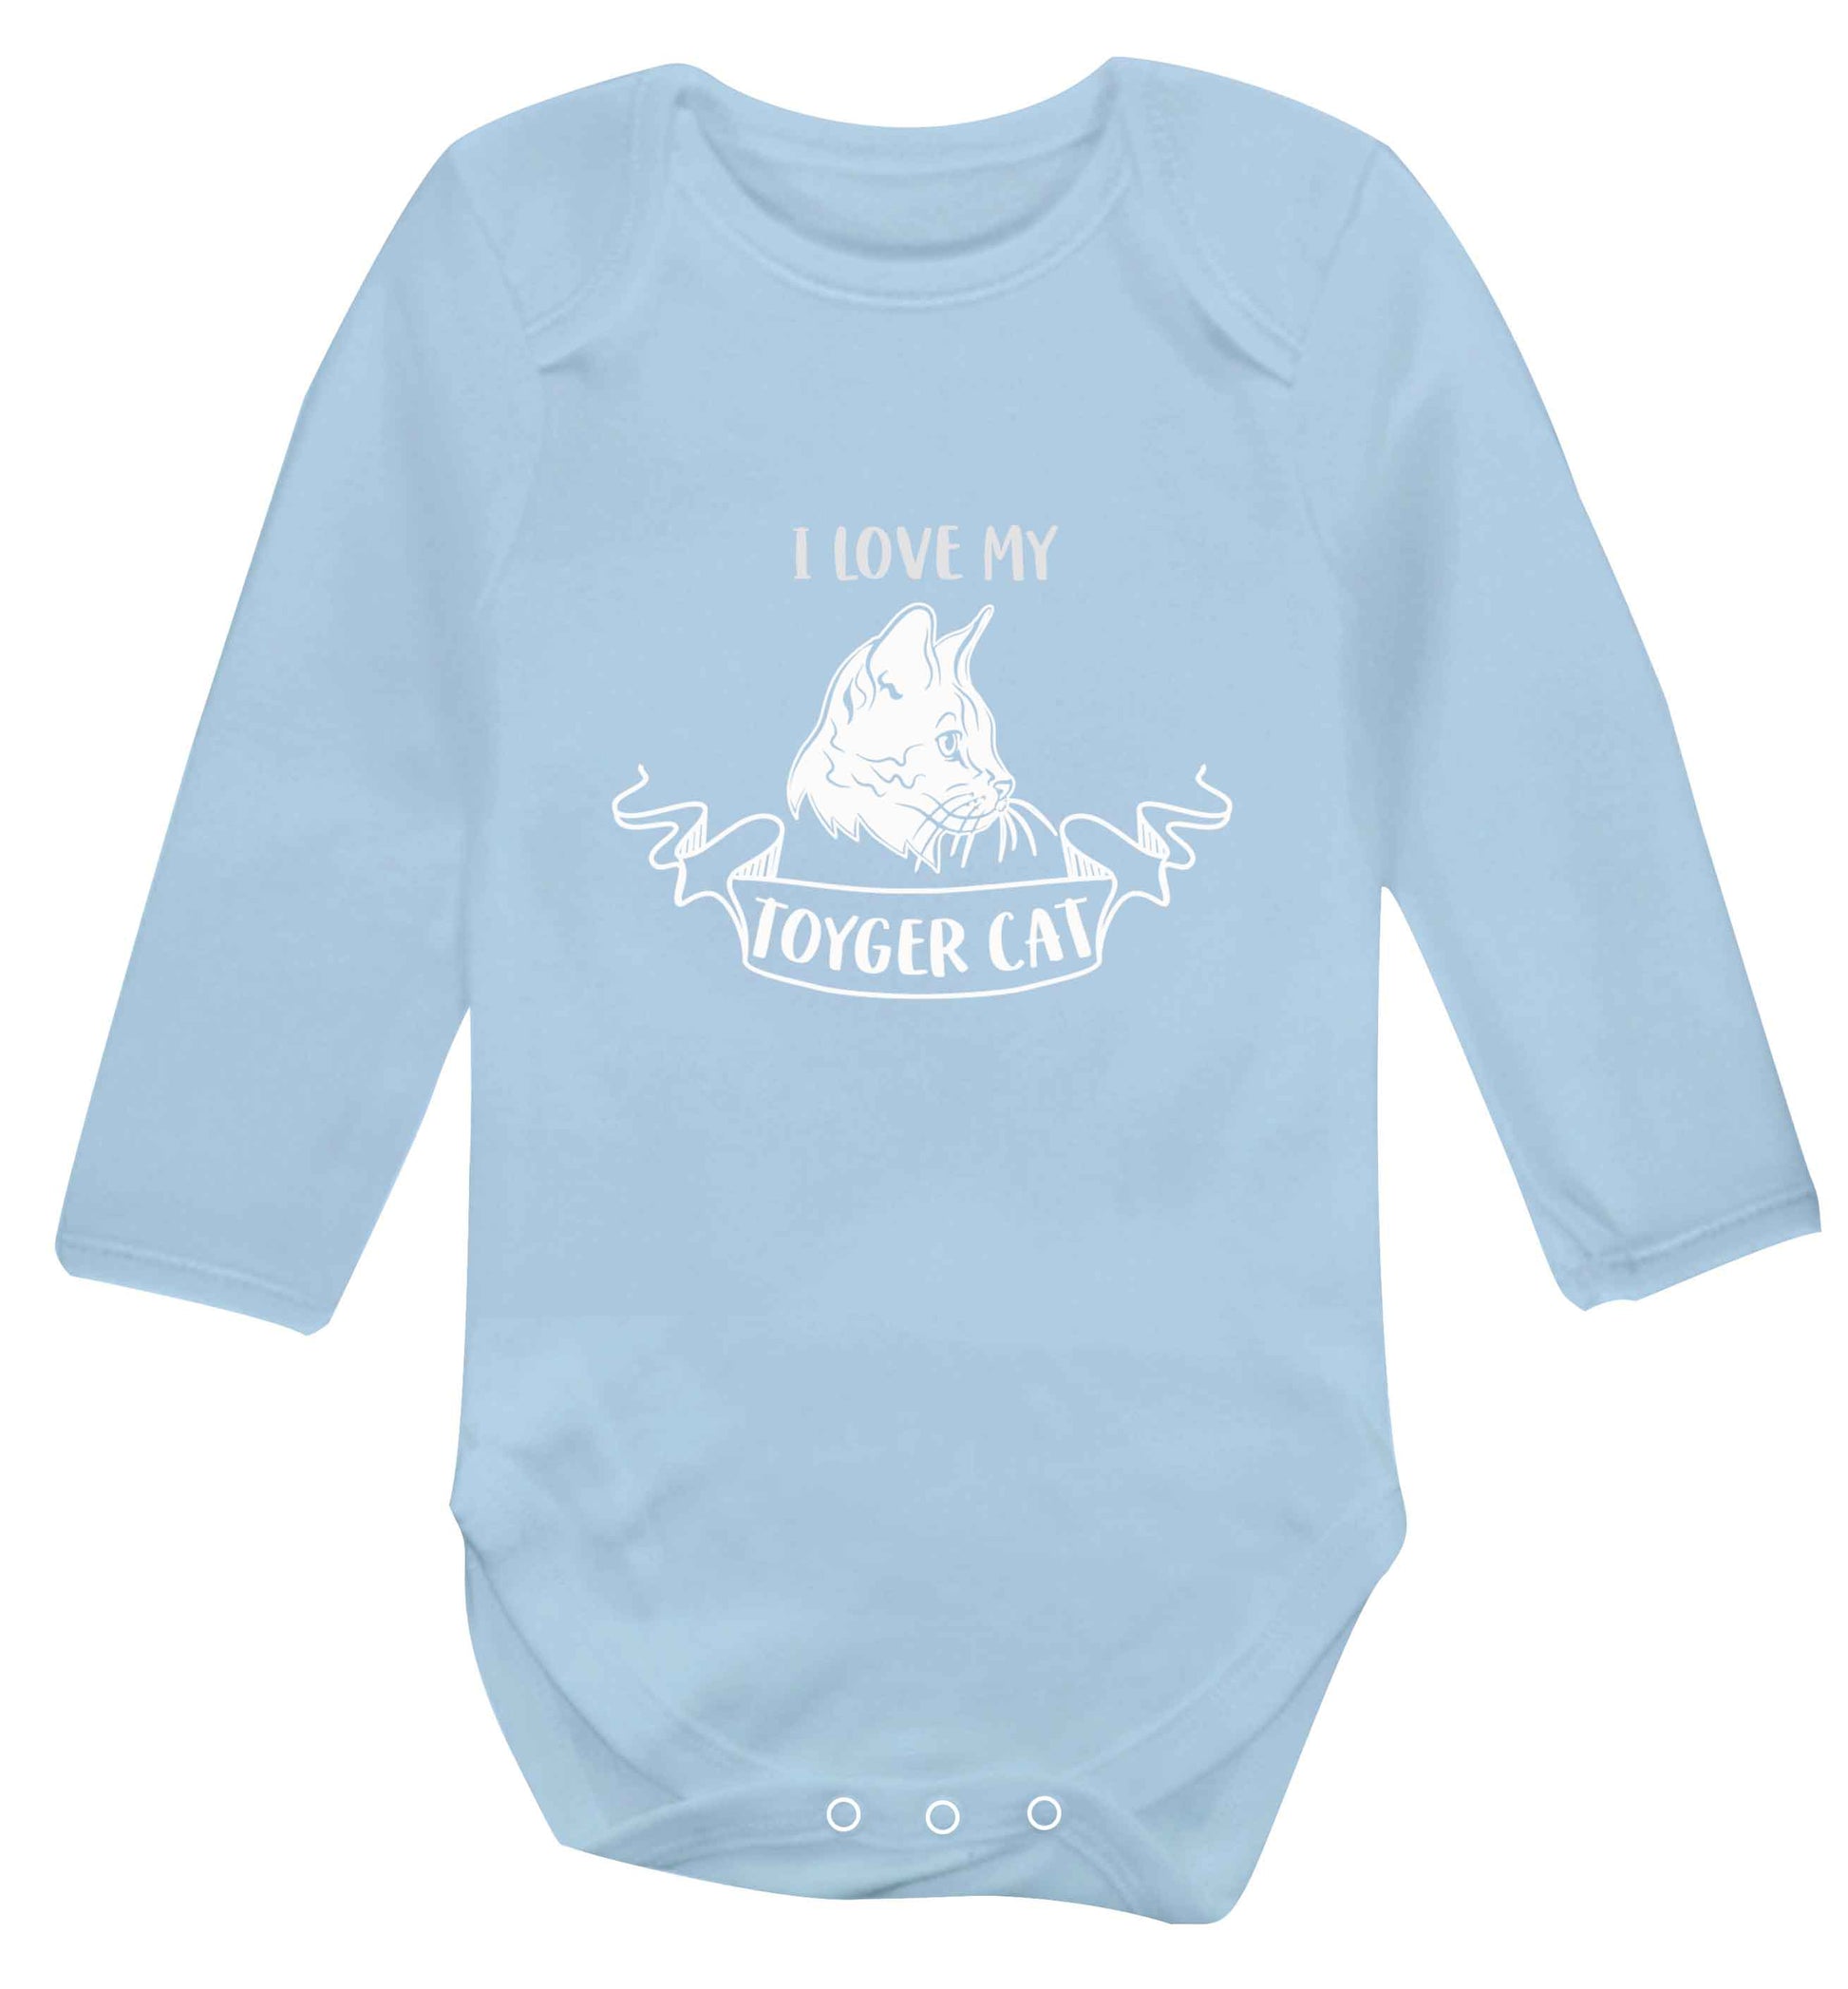 I love my toyger cat baby vest long sleeved pale blue 6-12 months